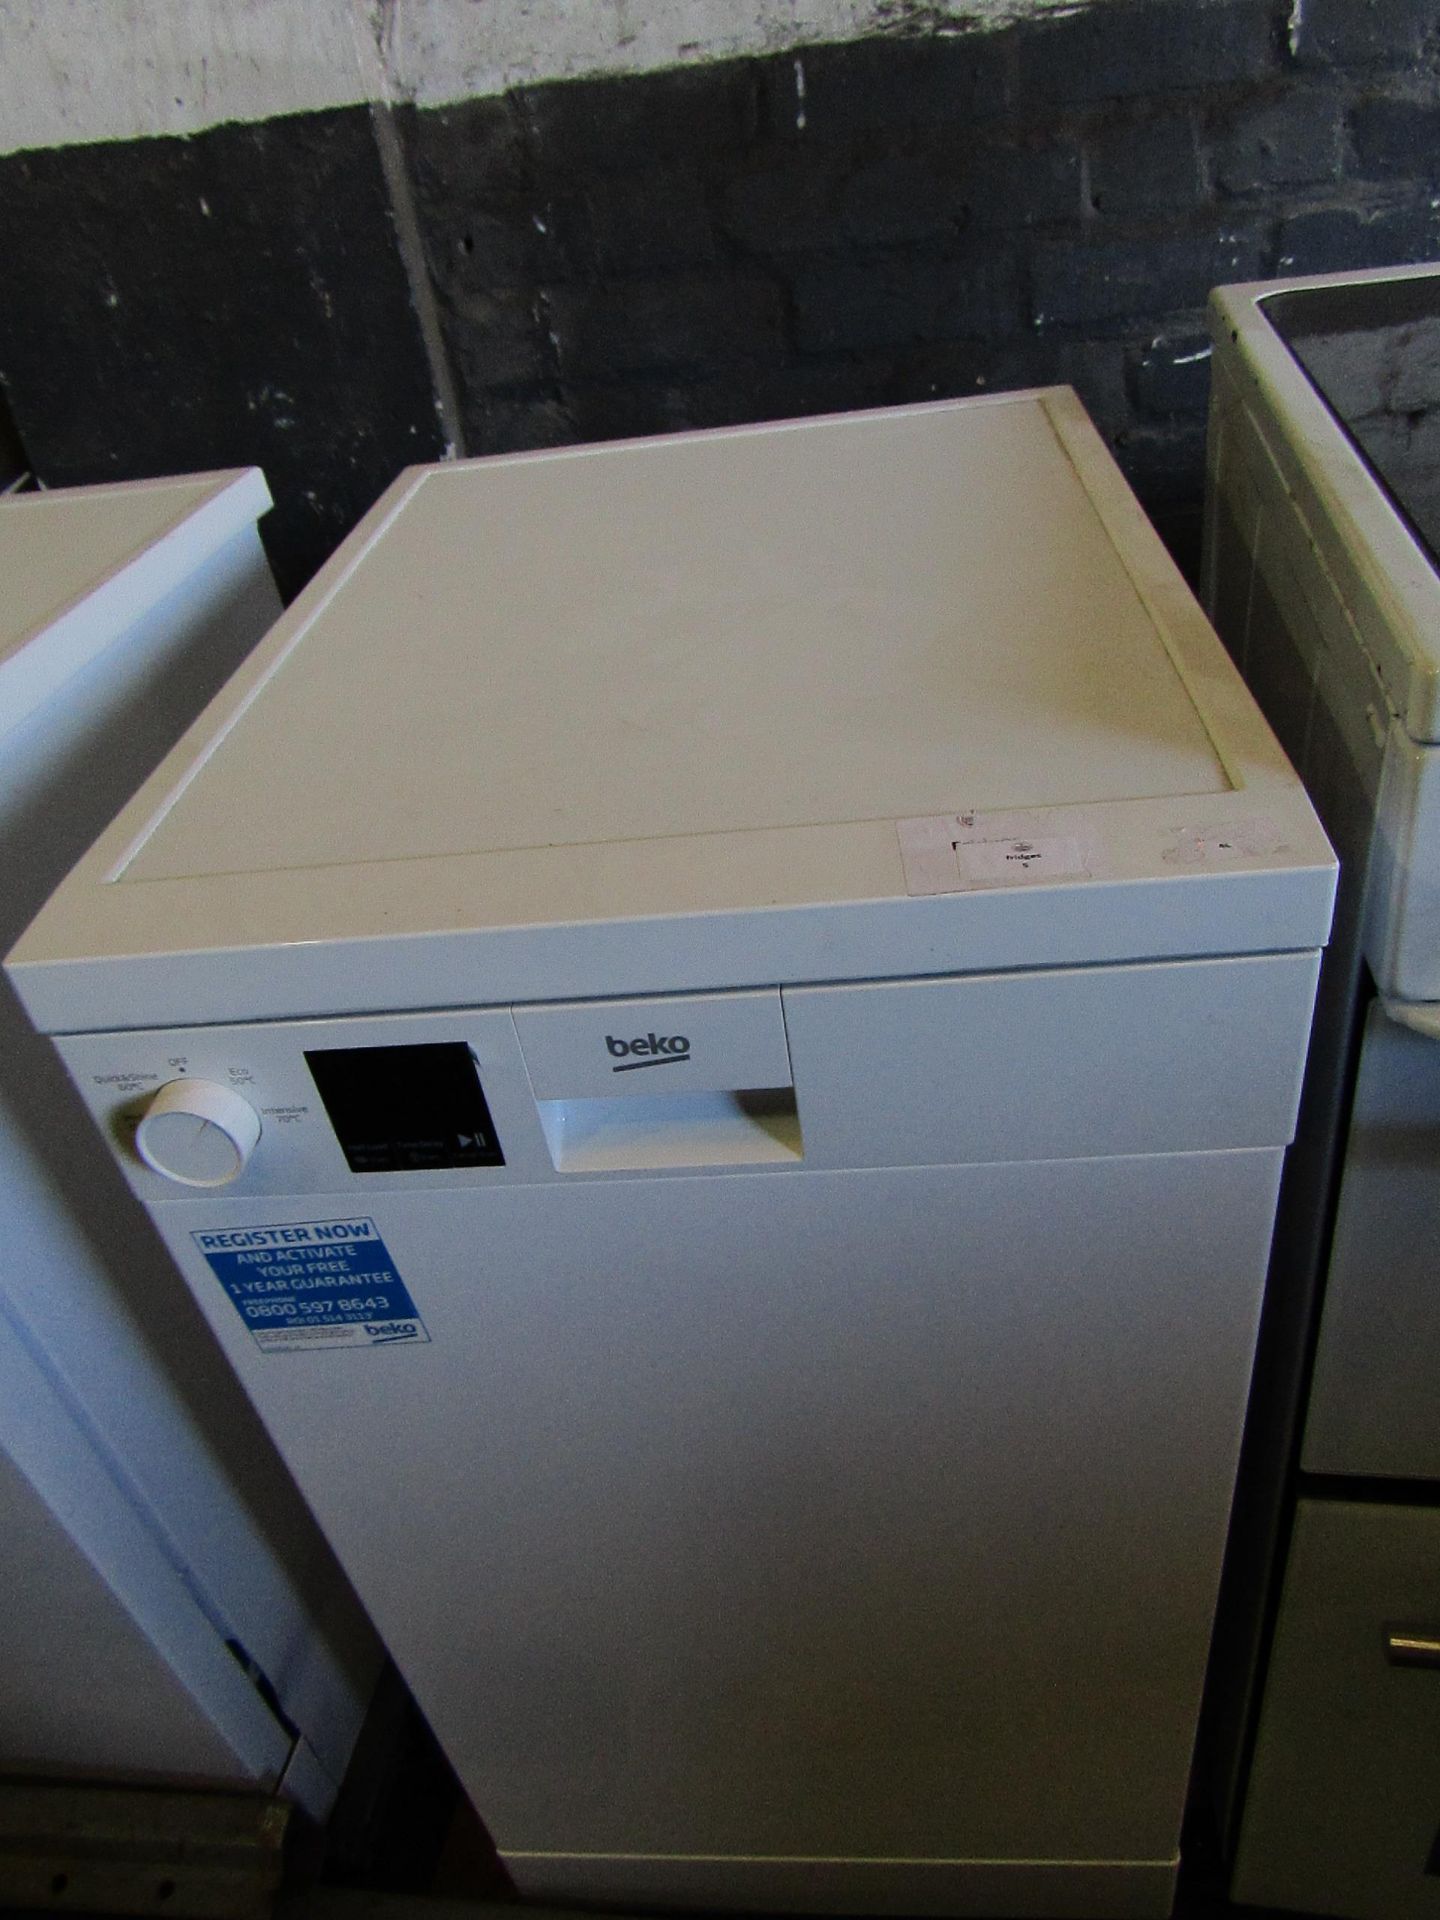 BEKO Dishwasher DVS04X20W RRP ô?249.00 - This item looks to be in good condition and appears ready